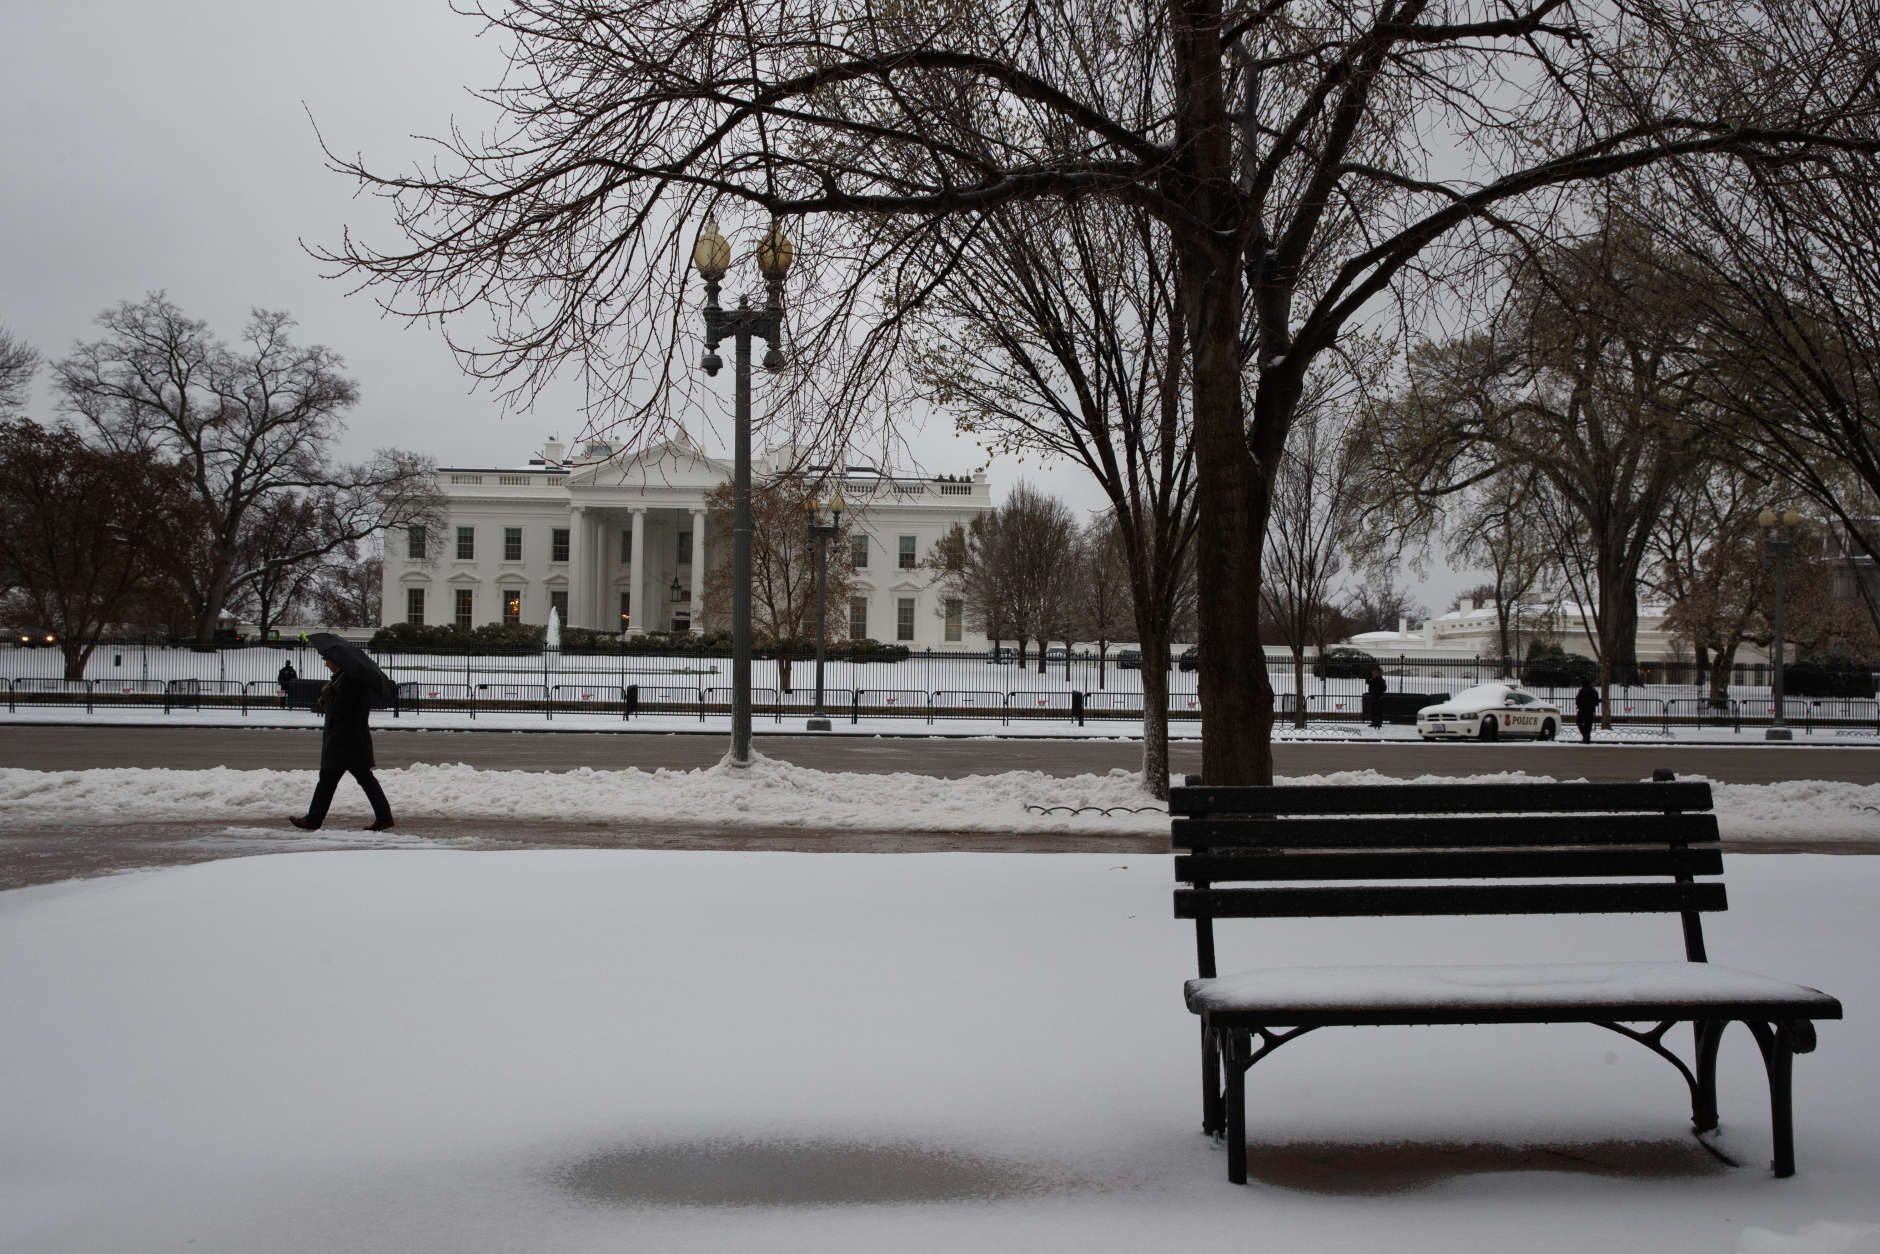 Snow covers the ground outside of the White House in Washington, Tuesday, March 14, 2017. A late-season storm is dumping a messy mix of snow, sleet and rain on the mid-Atlantic, complicating travel, knocking out power and closing schools and government offices around the region. (AP Photo/Evan Vucci)